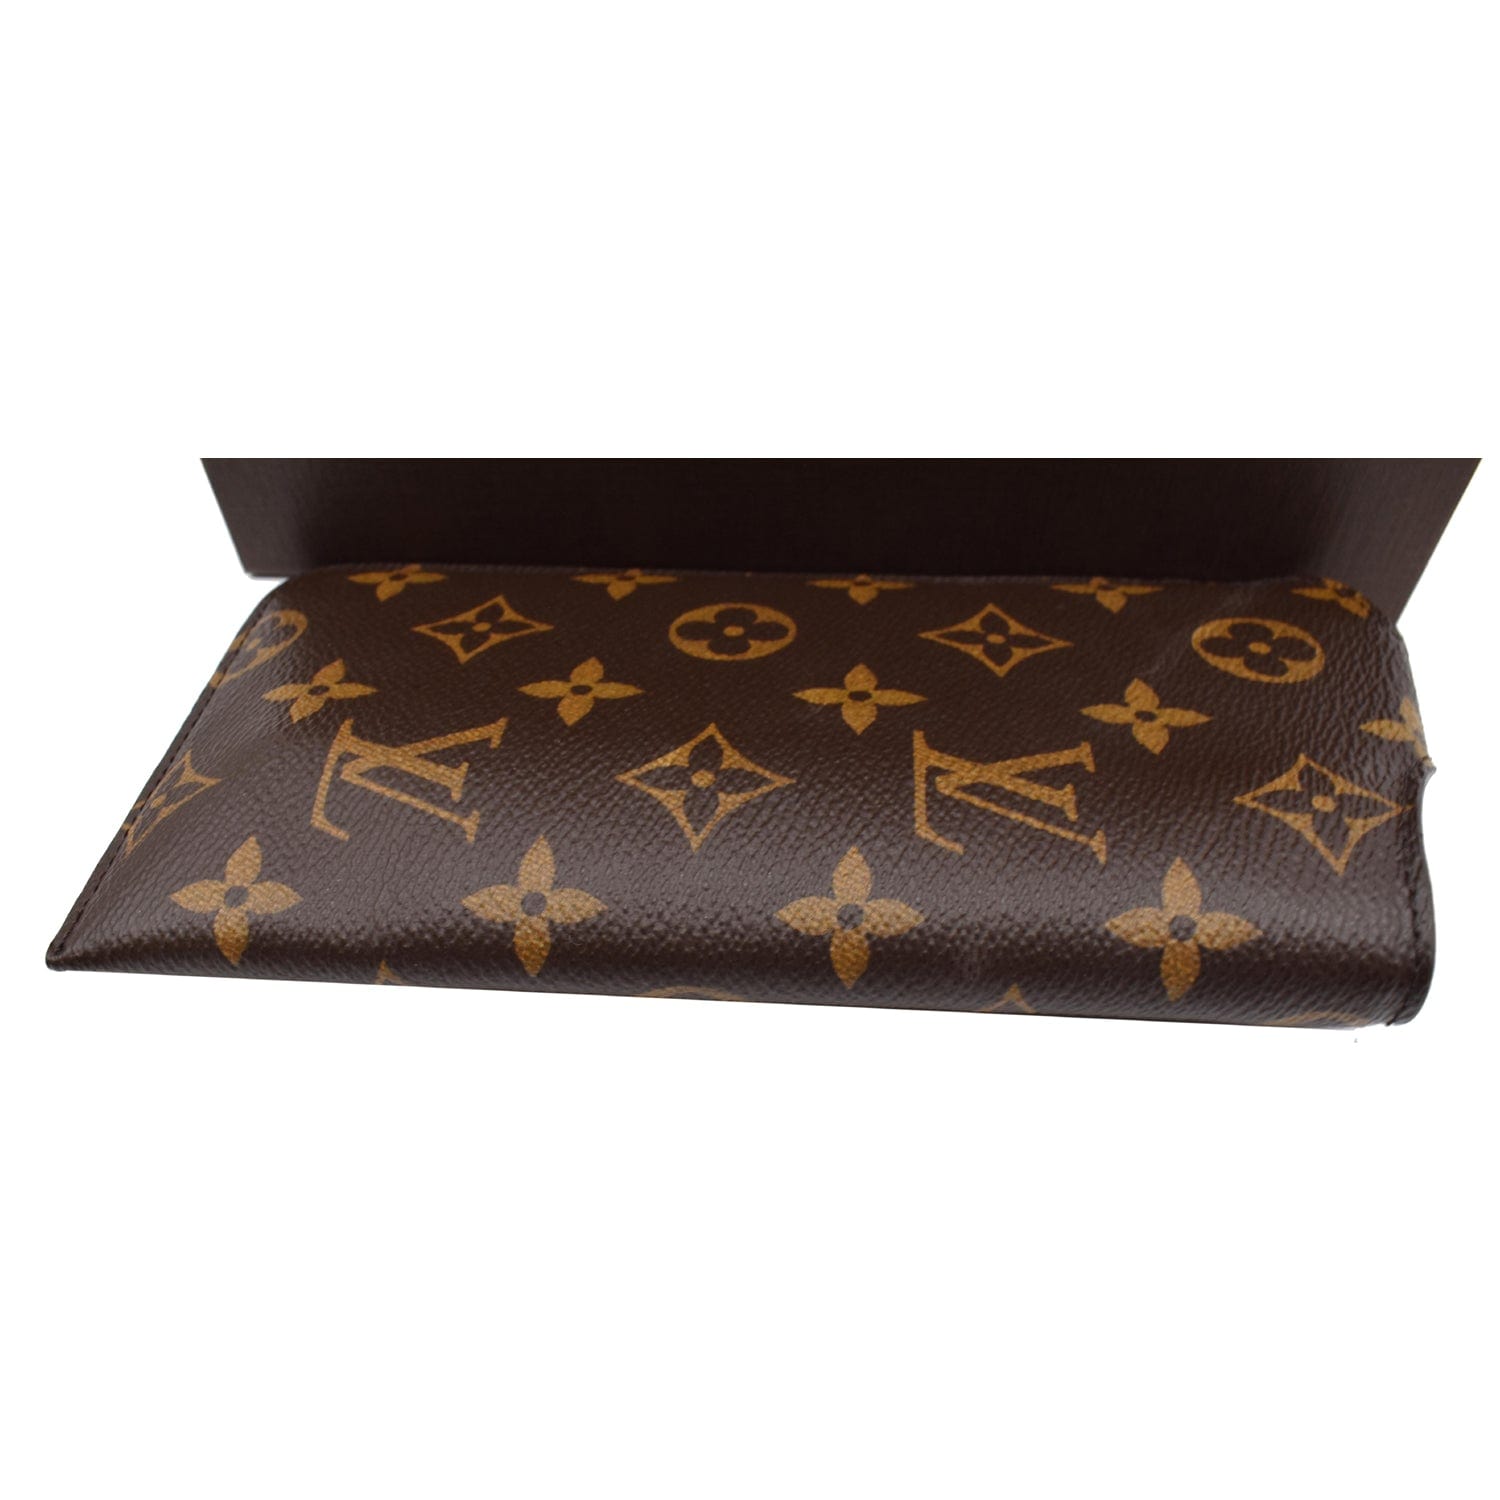 Woody Glasses Case Monogram Eclipse Canvas  Sport and Lifestyle  LOUIS  VUITTON